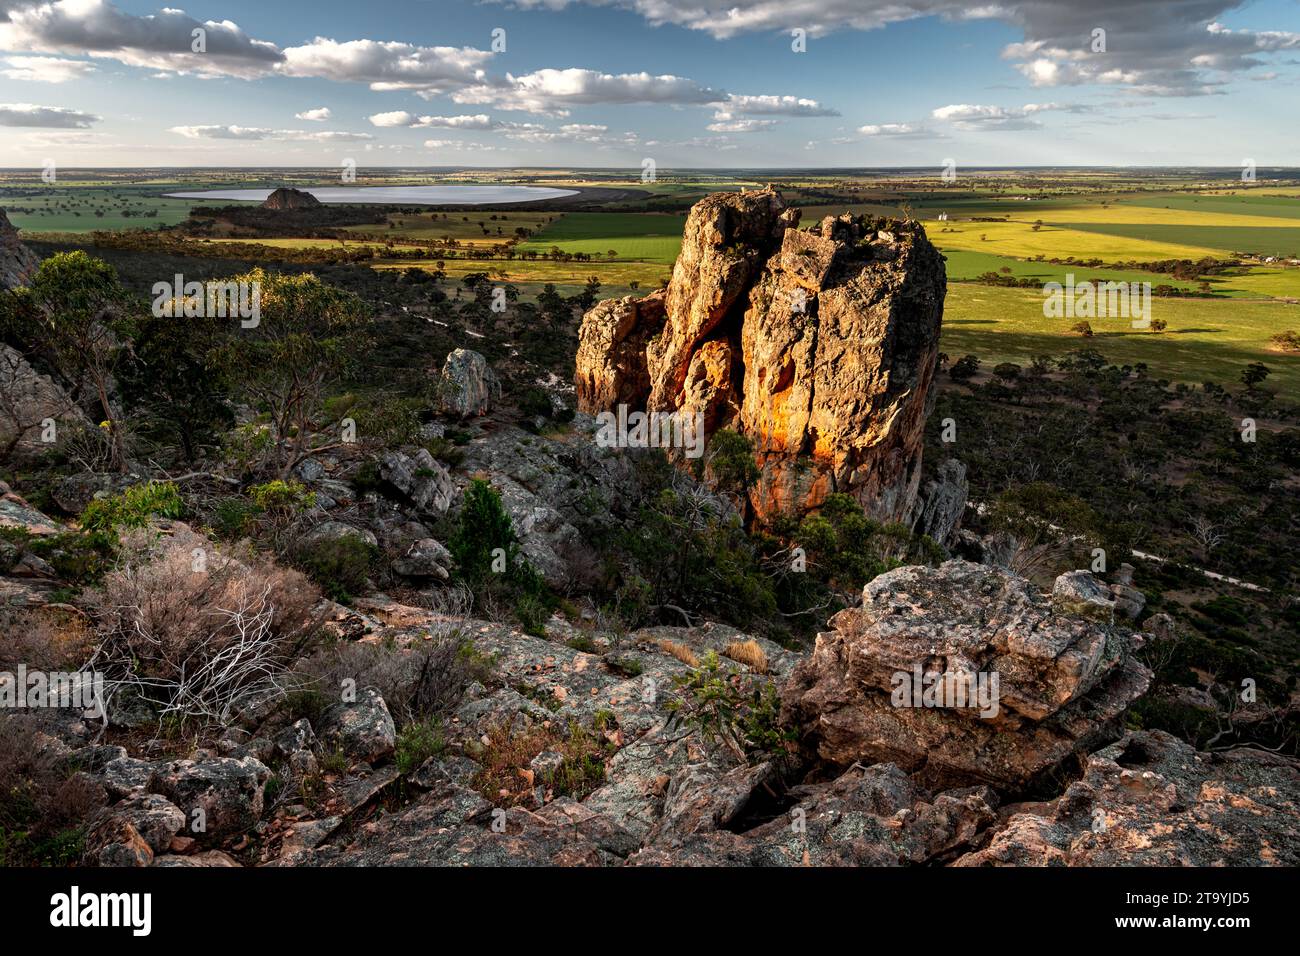 The Pharos is a rock formation located in Mount Arapiles Tooan State Park, famous for challenging rock climbing. Stock Photo